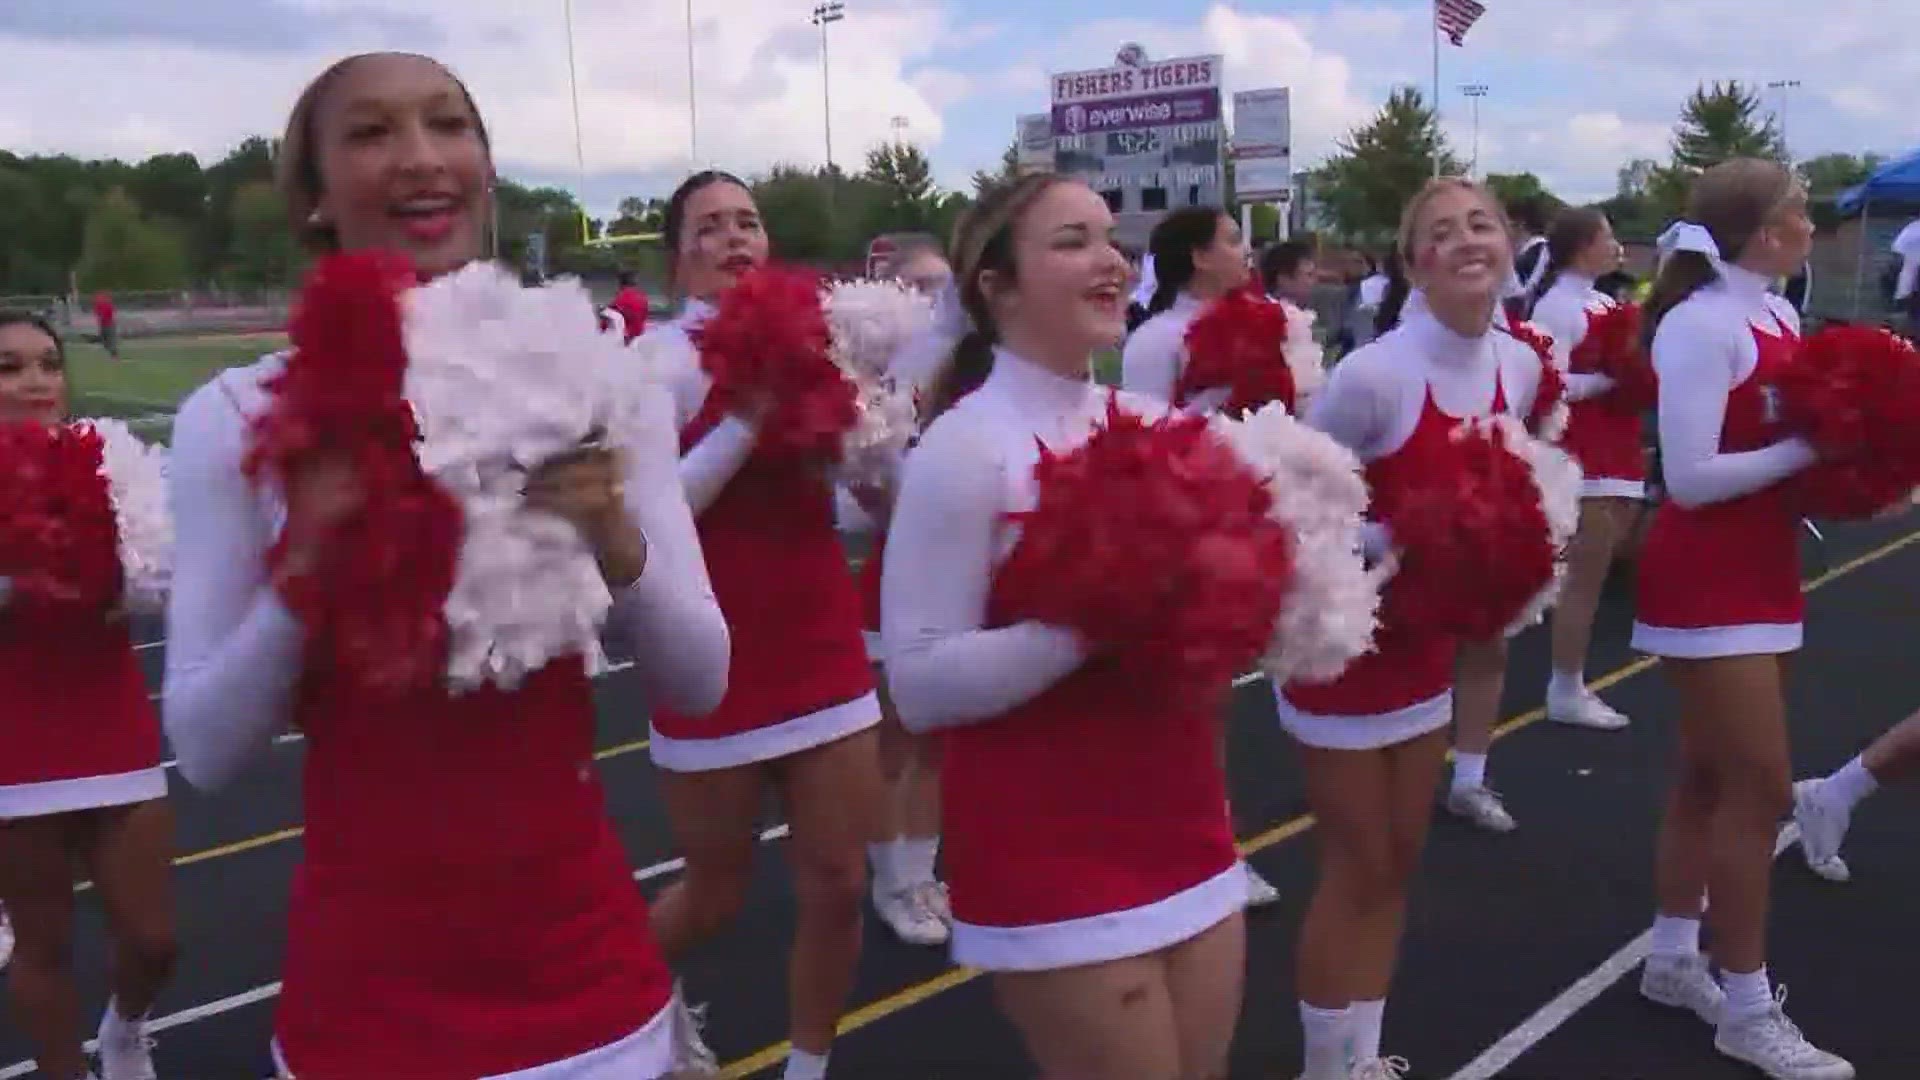 The Fishers High School cheerleaders perform a routine as the Operation Football Cheerleaders of the Week.